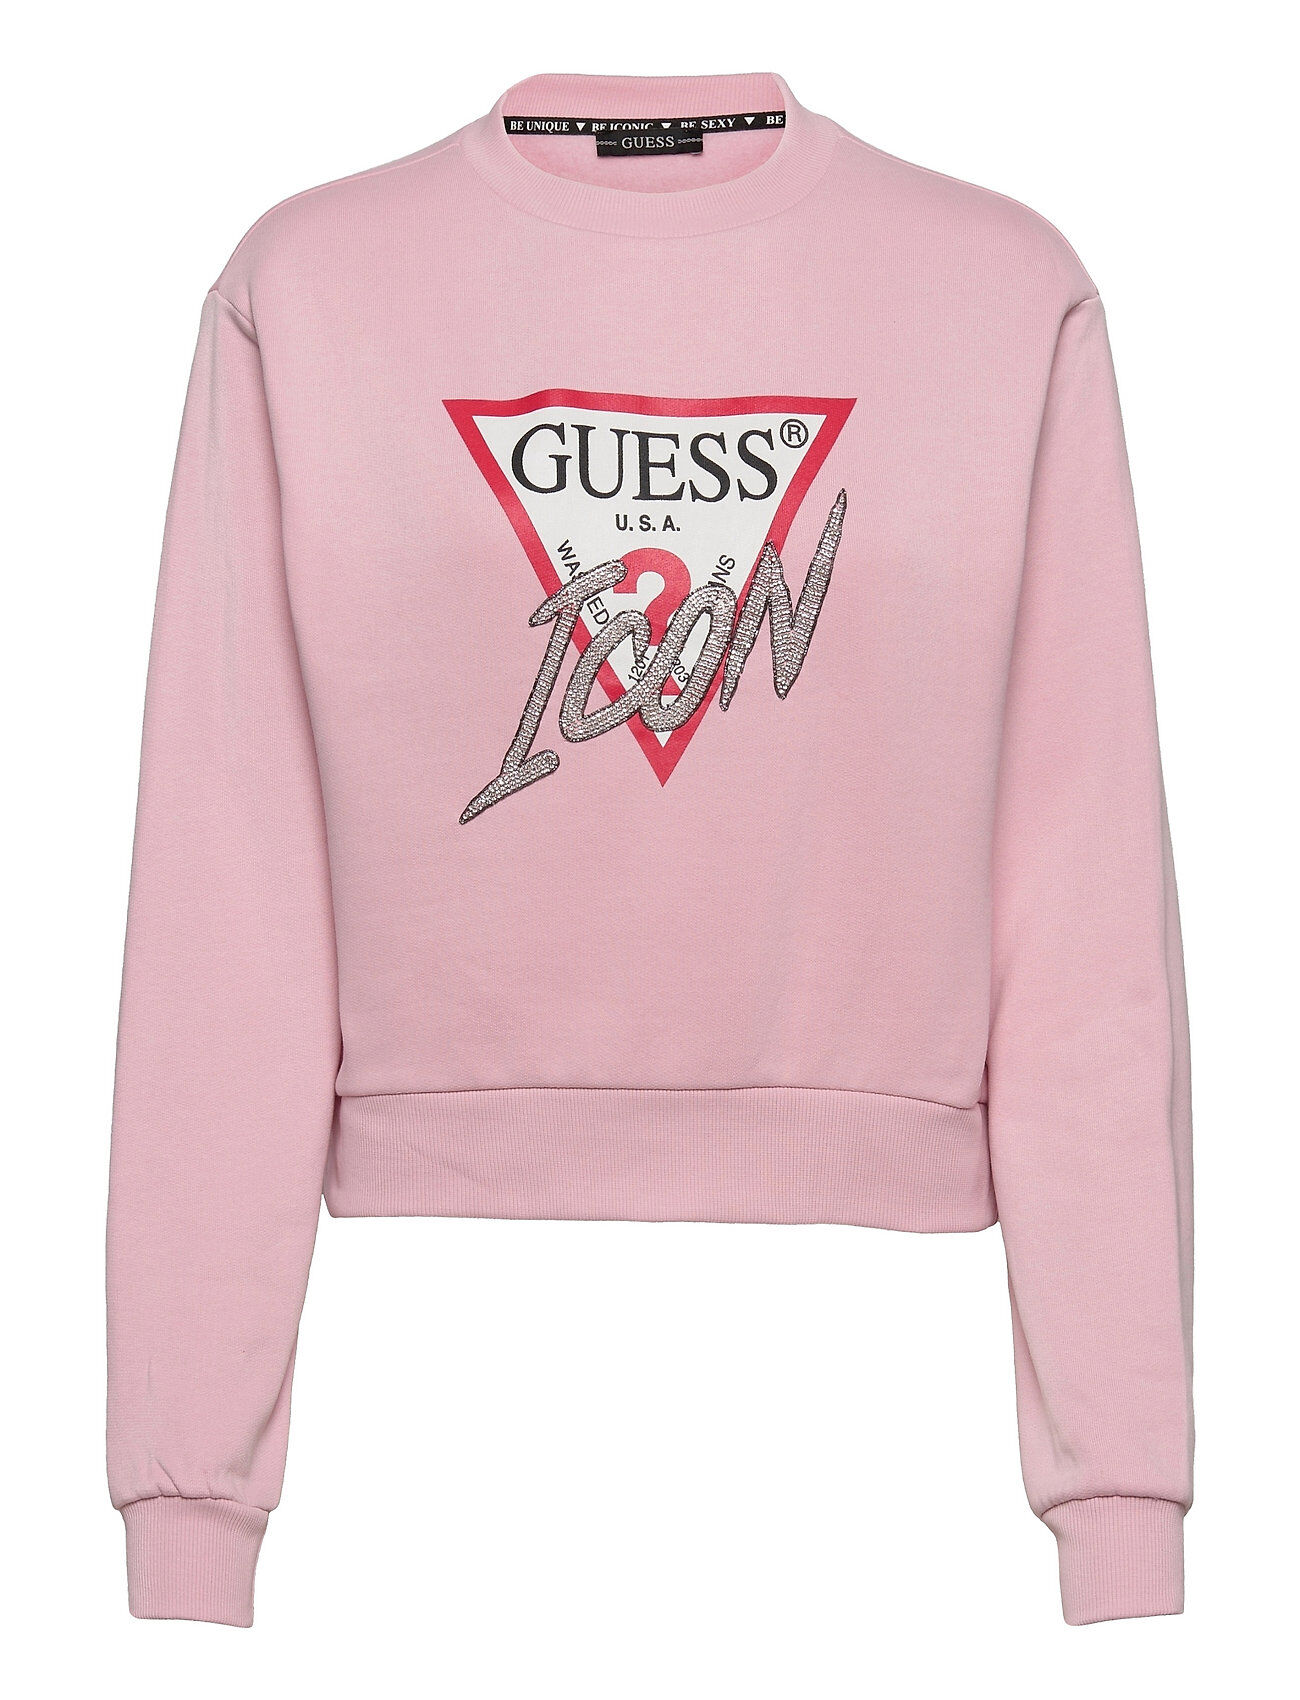 GUESS Jeans Icon Fleece Sweat-shirt Genser Rosa GUESS Jeans